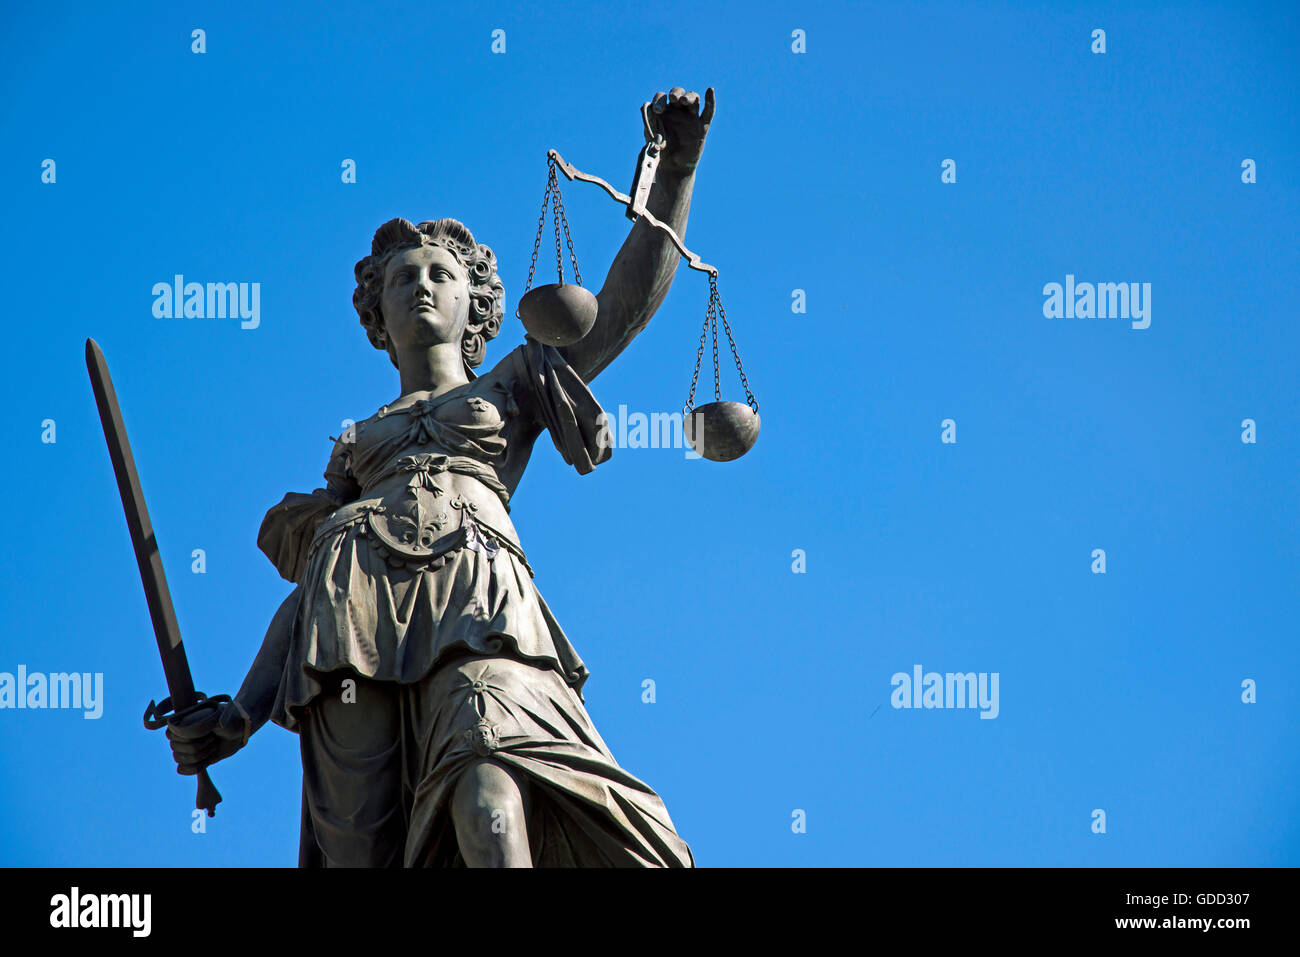 Lady Justice, Roman goddess of justice, with executioner's sword and scales pan, fountain of justice, Roemerberg (Roman Mountain), Frankfurt on the Main, Germany, Stock Photo